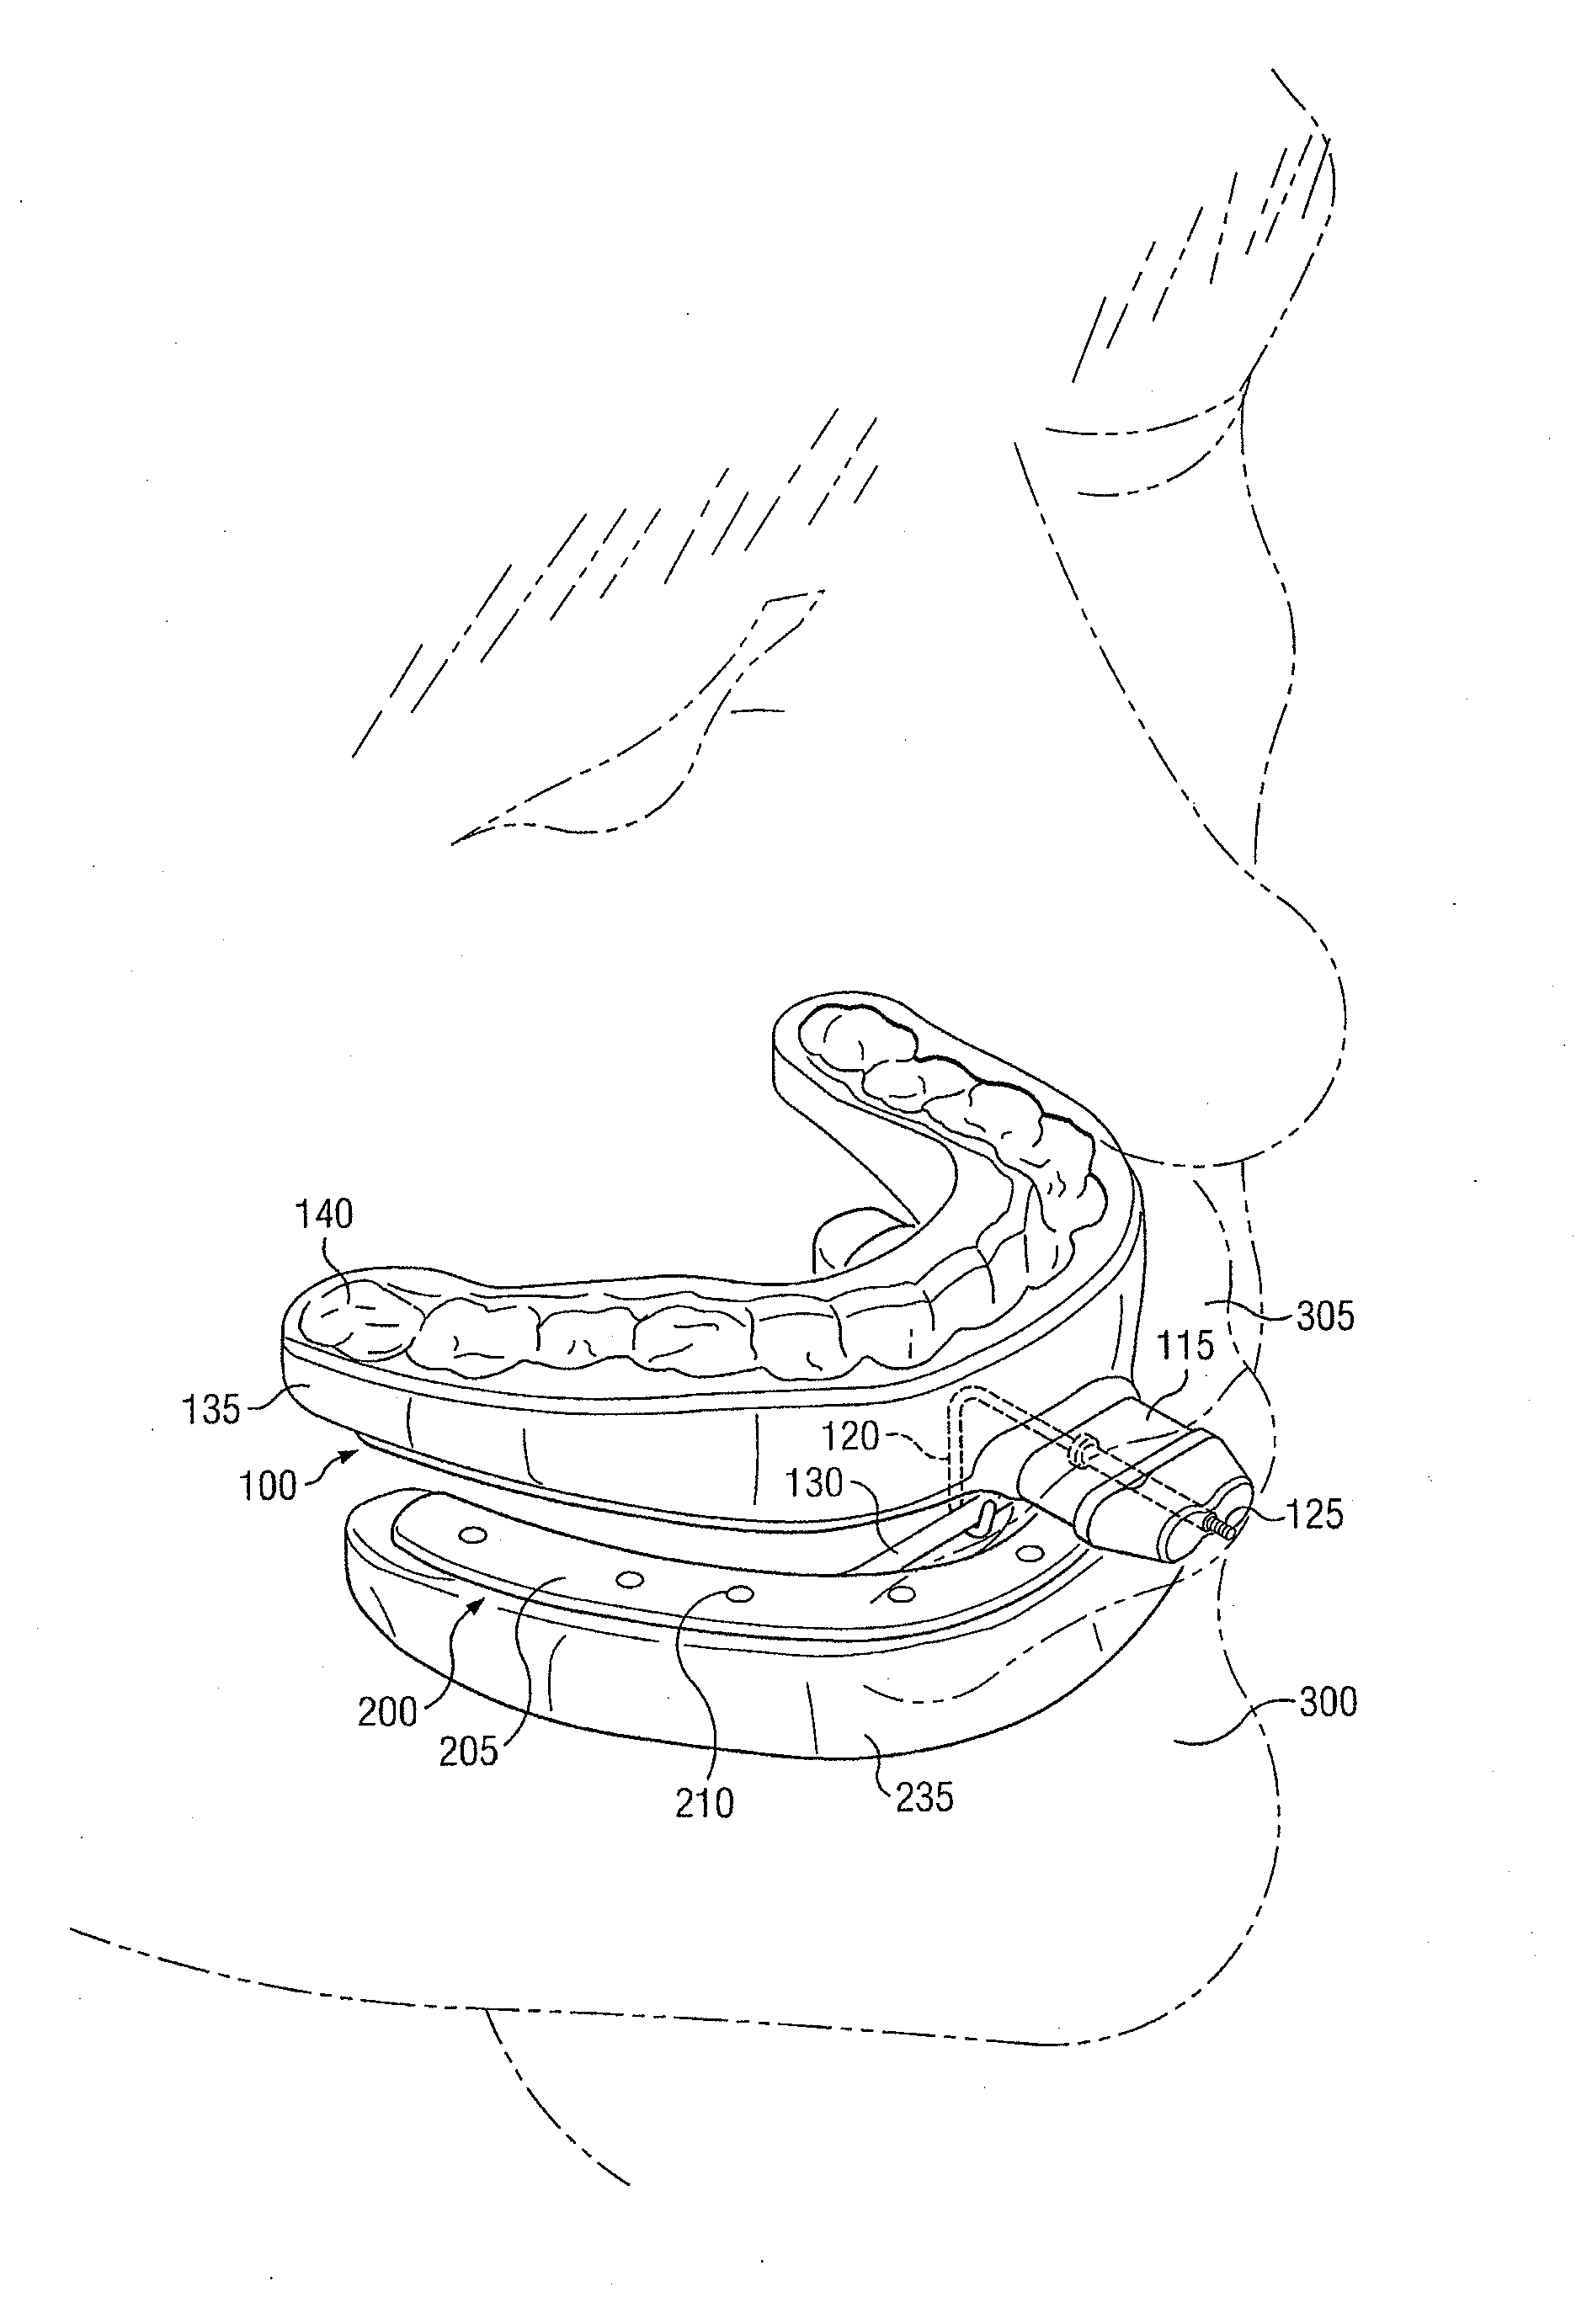 Universal oral appliance with a universal coupler